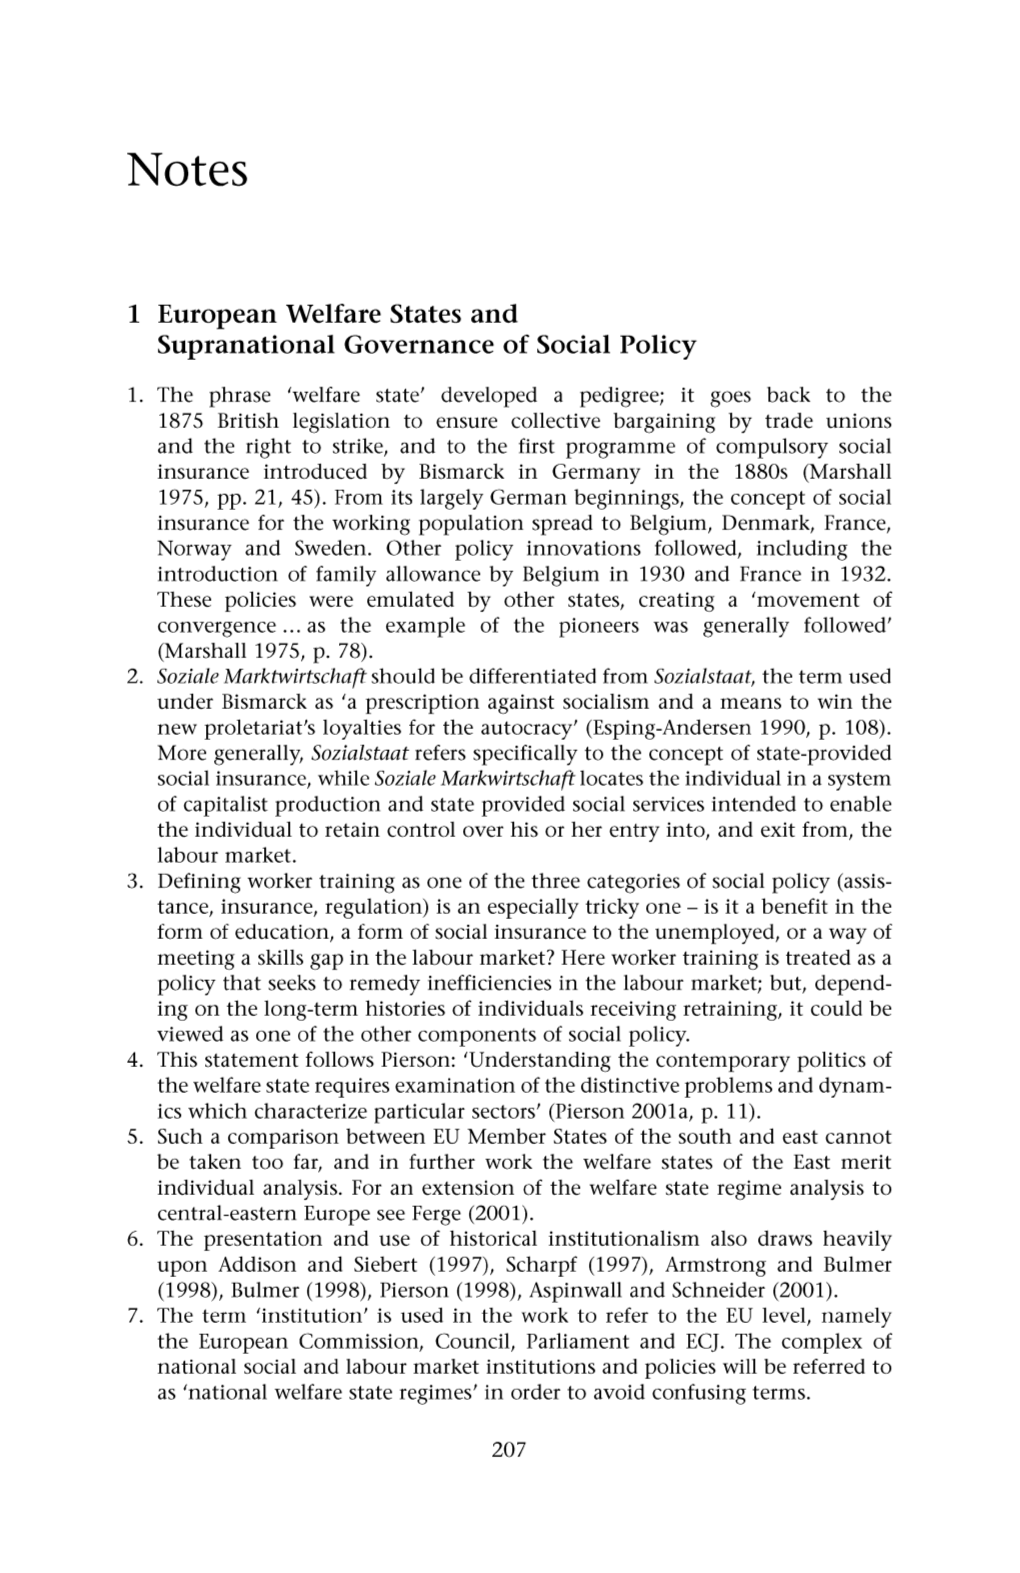 1 European Welfare States and Supranational Governance of Social Policy